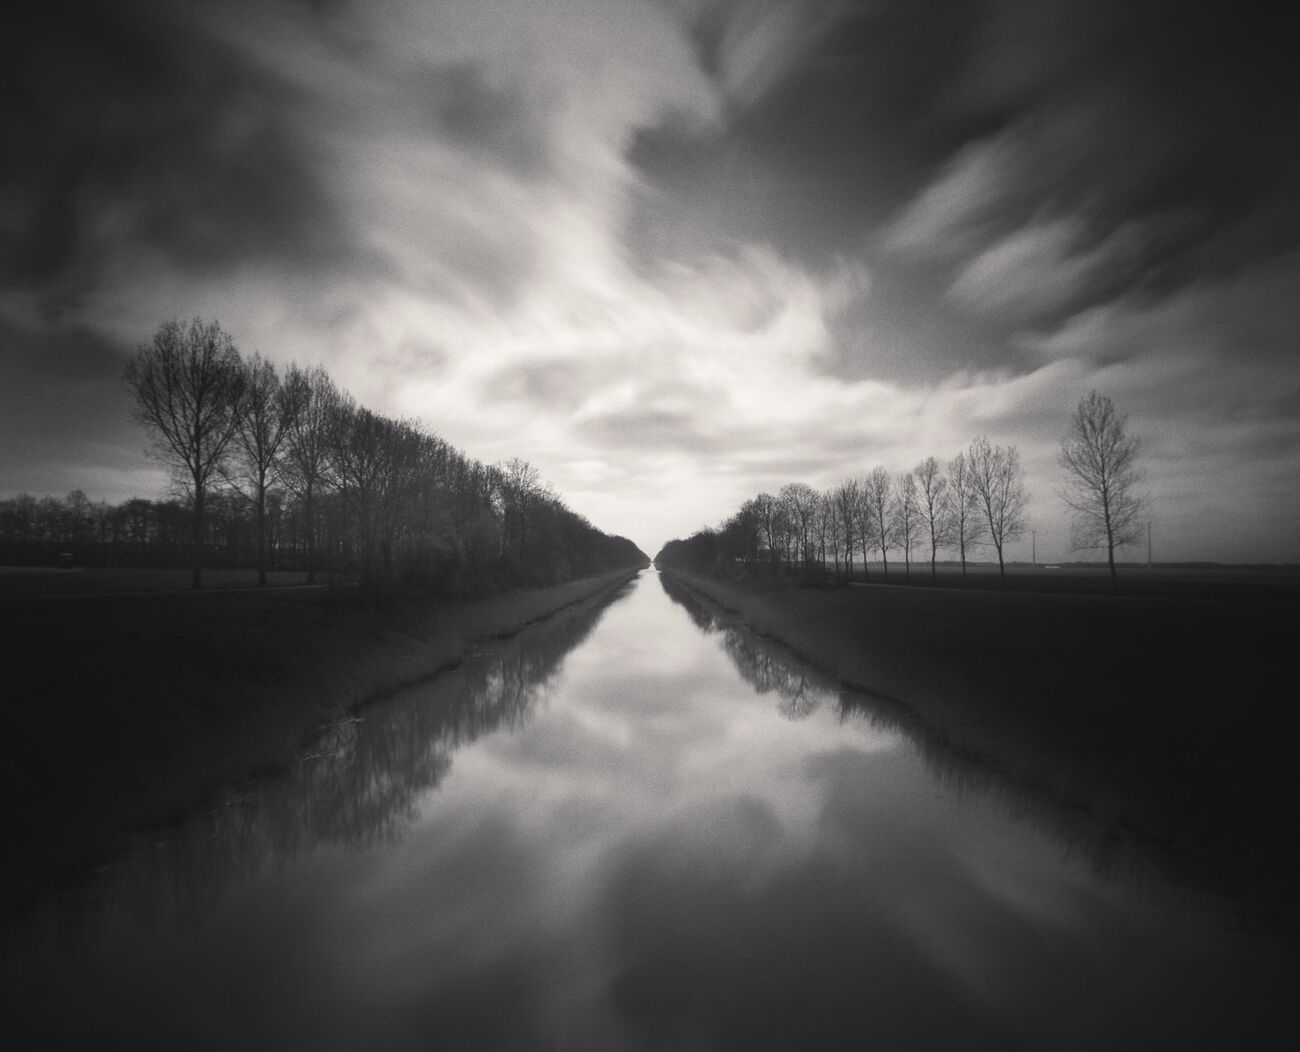 Aligned Canal And Trees, Netherlands, Pays-Bas. Avril 2015. Ref-1320 - Denis Olivier Photographie